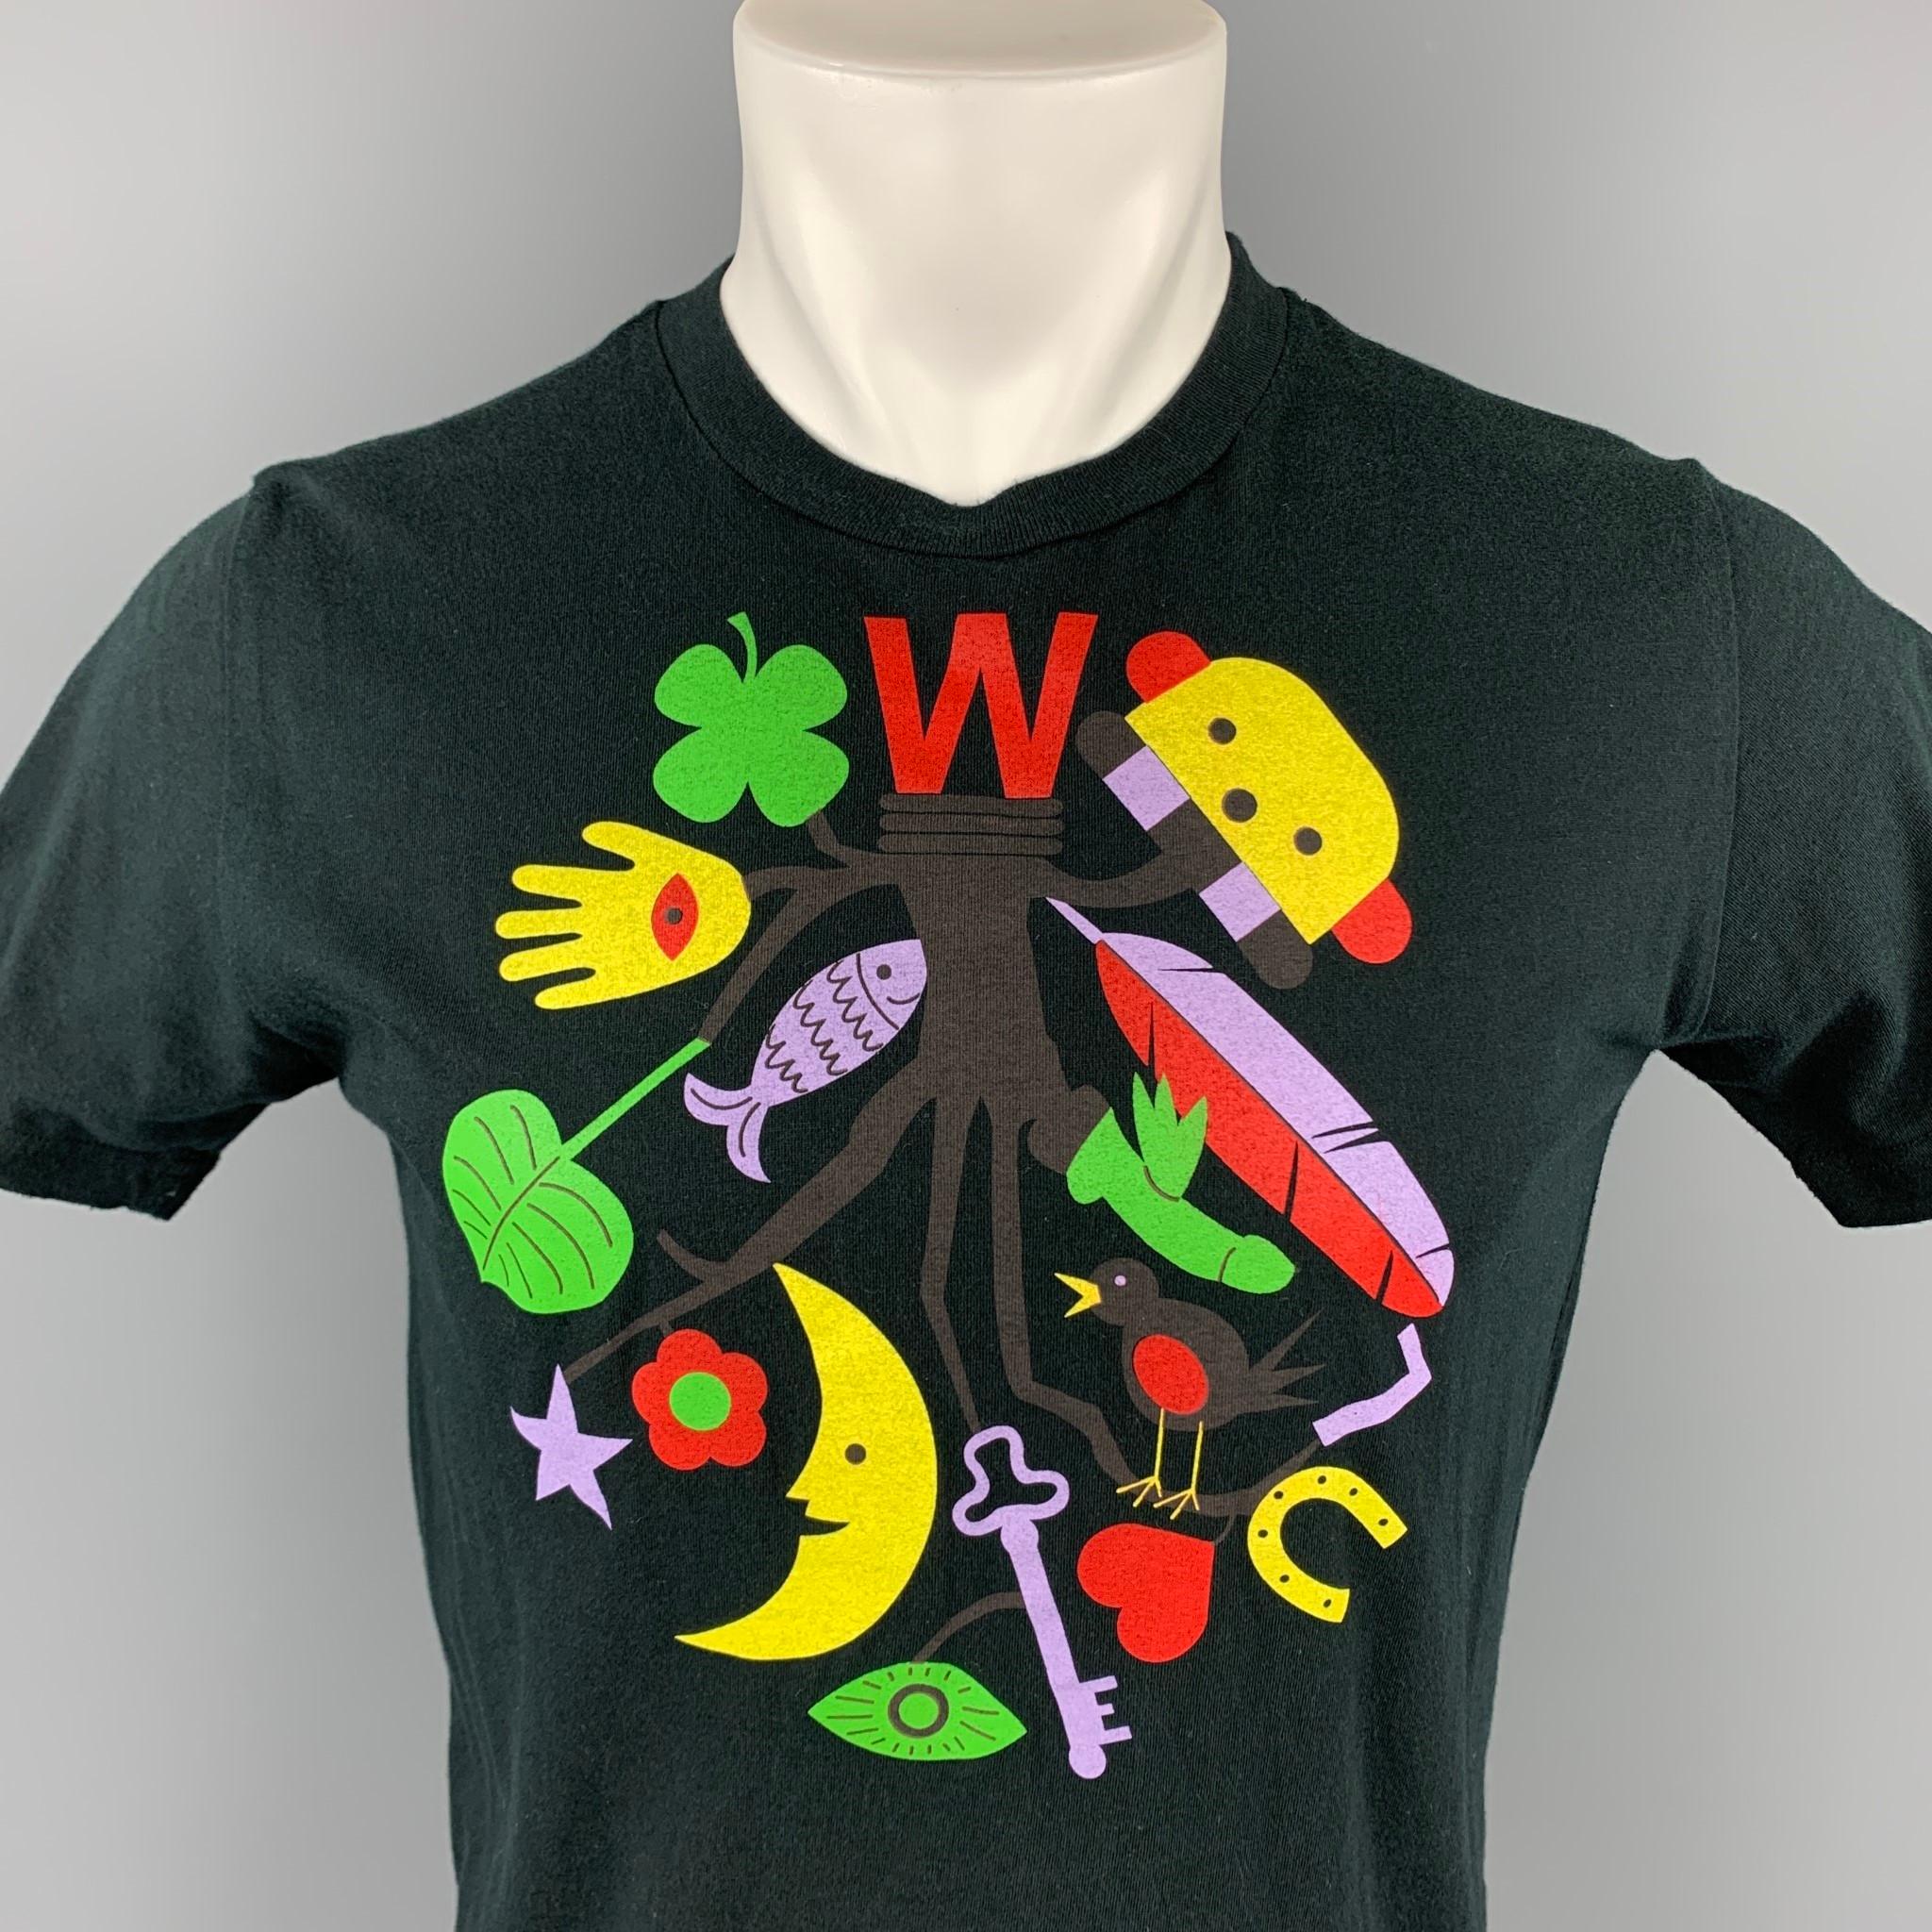 WALTER VAN BEIRENDONCK t-shirt comes in a black cotton with a front graphic design featuring a crew-neck. Made in Italy.

Very Good Pre-Owned Condition.
Marked: M

Measurements:

Shoulder: 17.5 in.
Chest: 38 in.
Sleeve: 8 in.
Length: 24.5 in. 